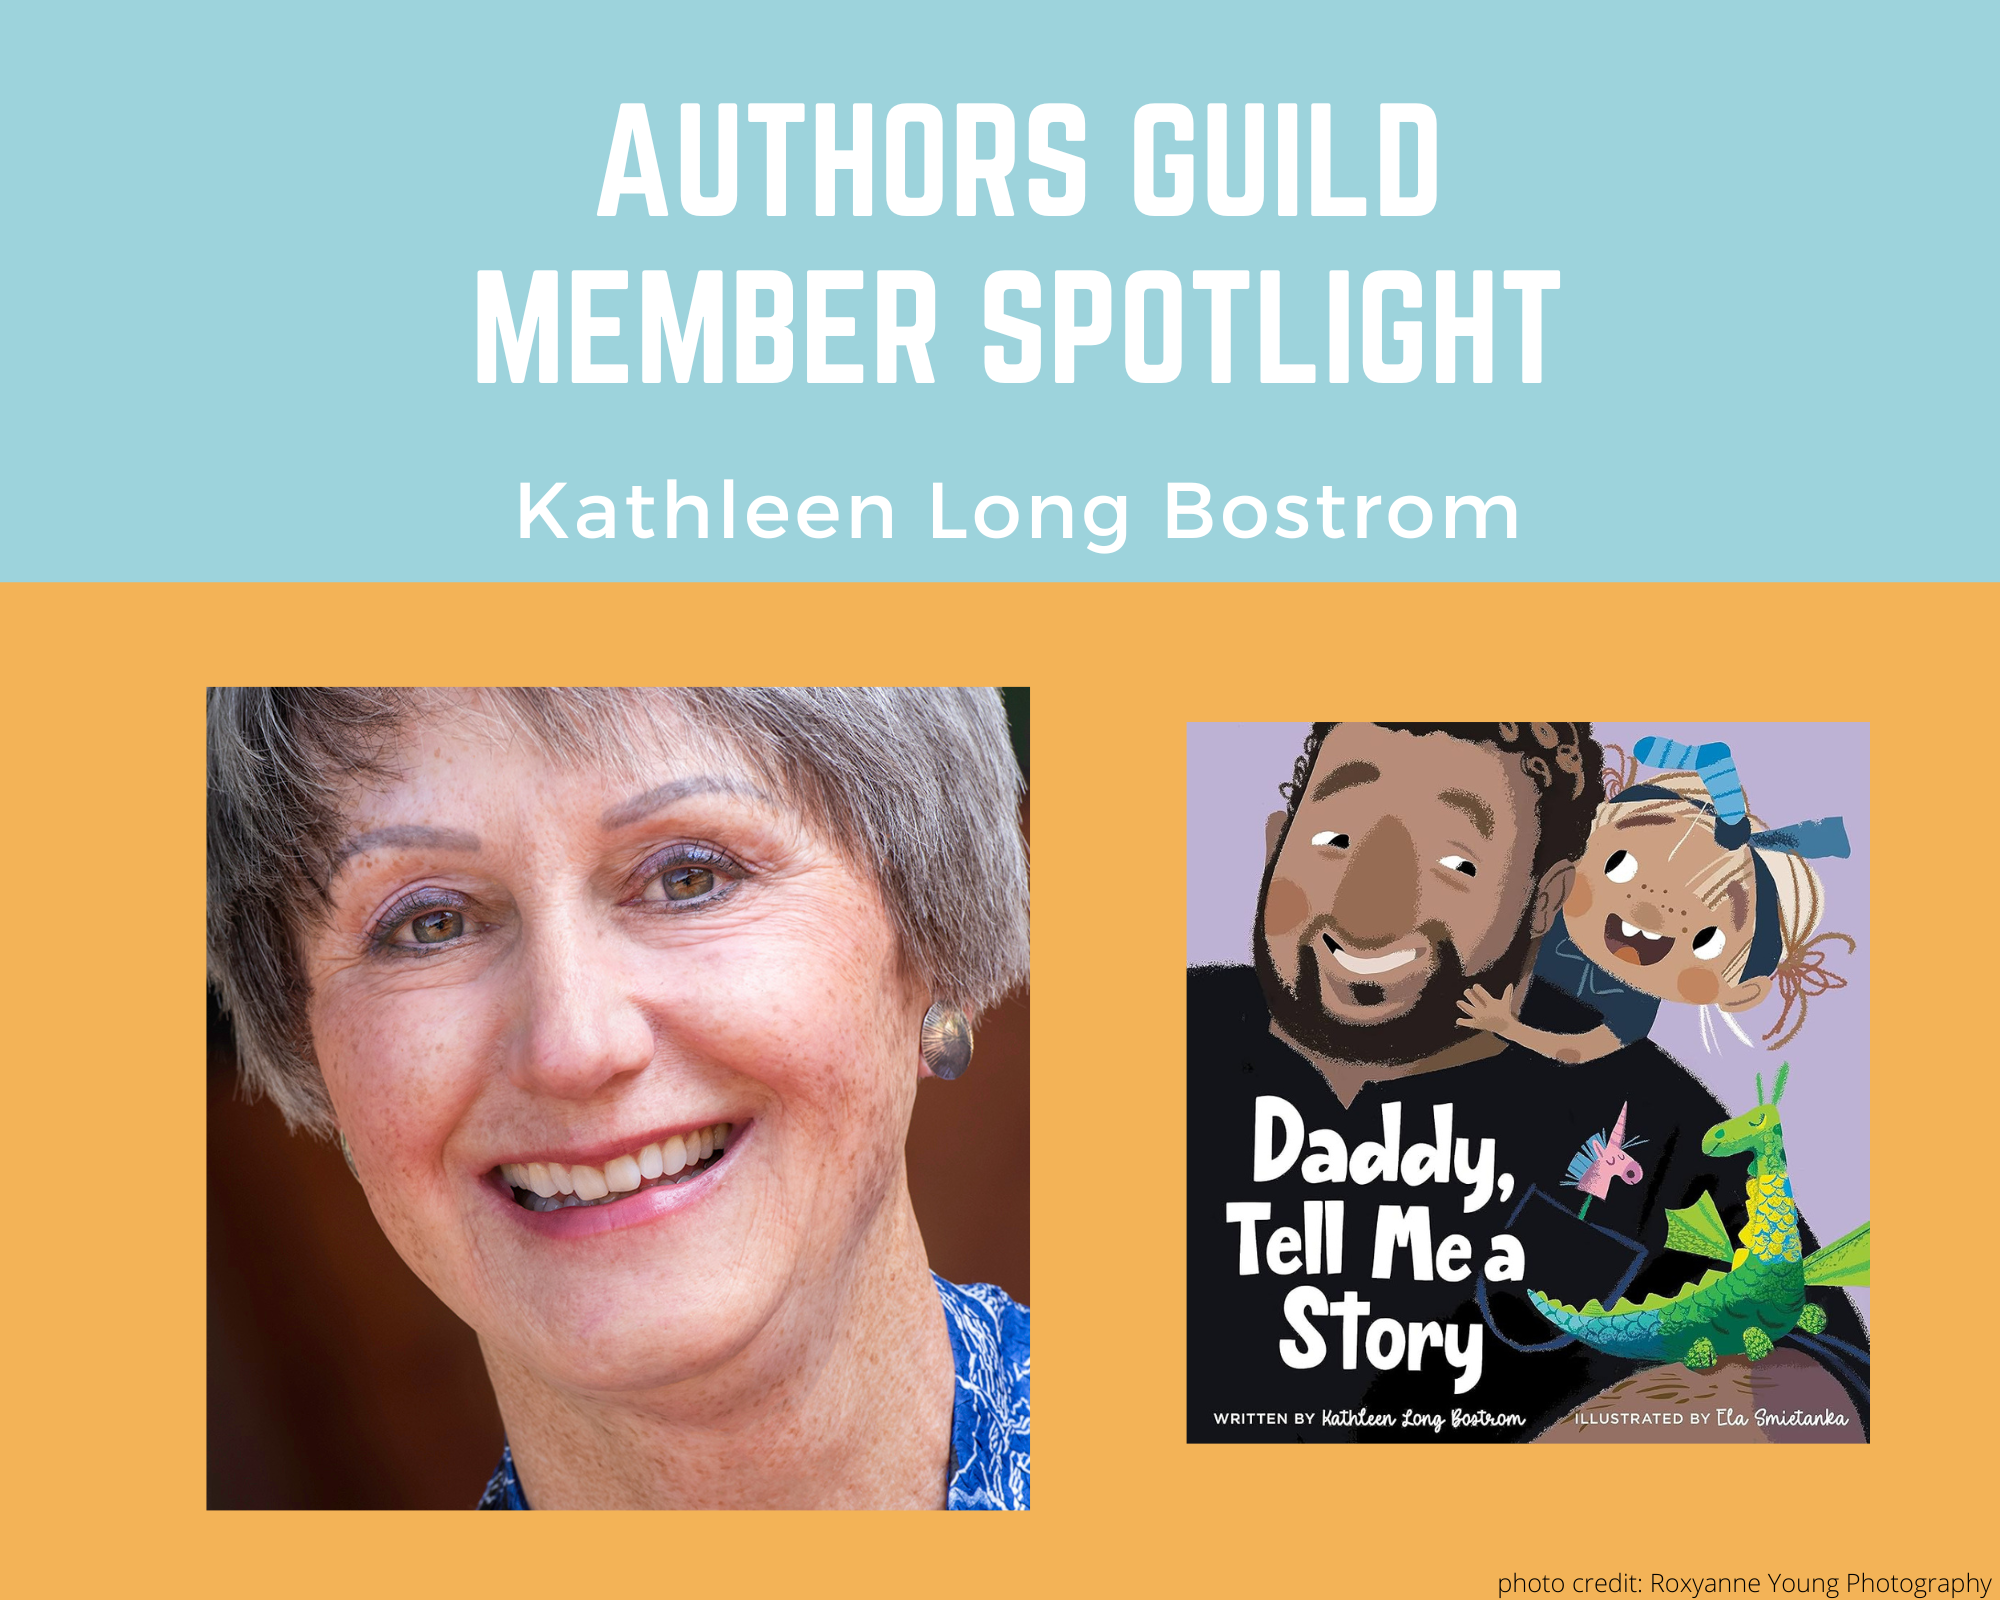 author Kathleen Long Bostrom and an image of her book Daddy, Tell Me a Story